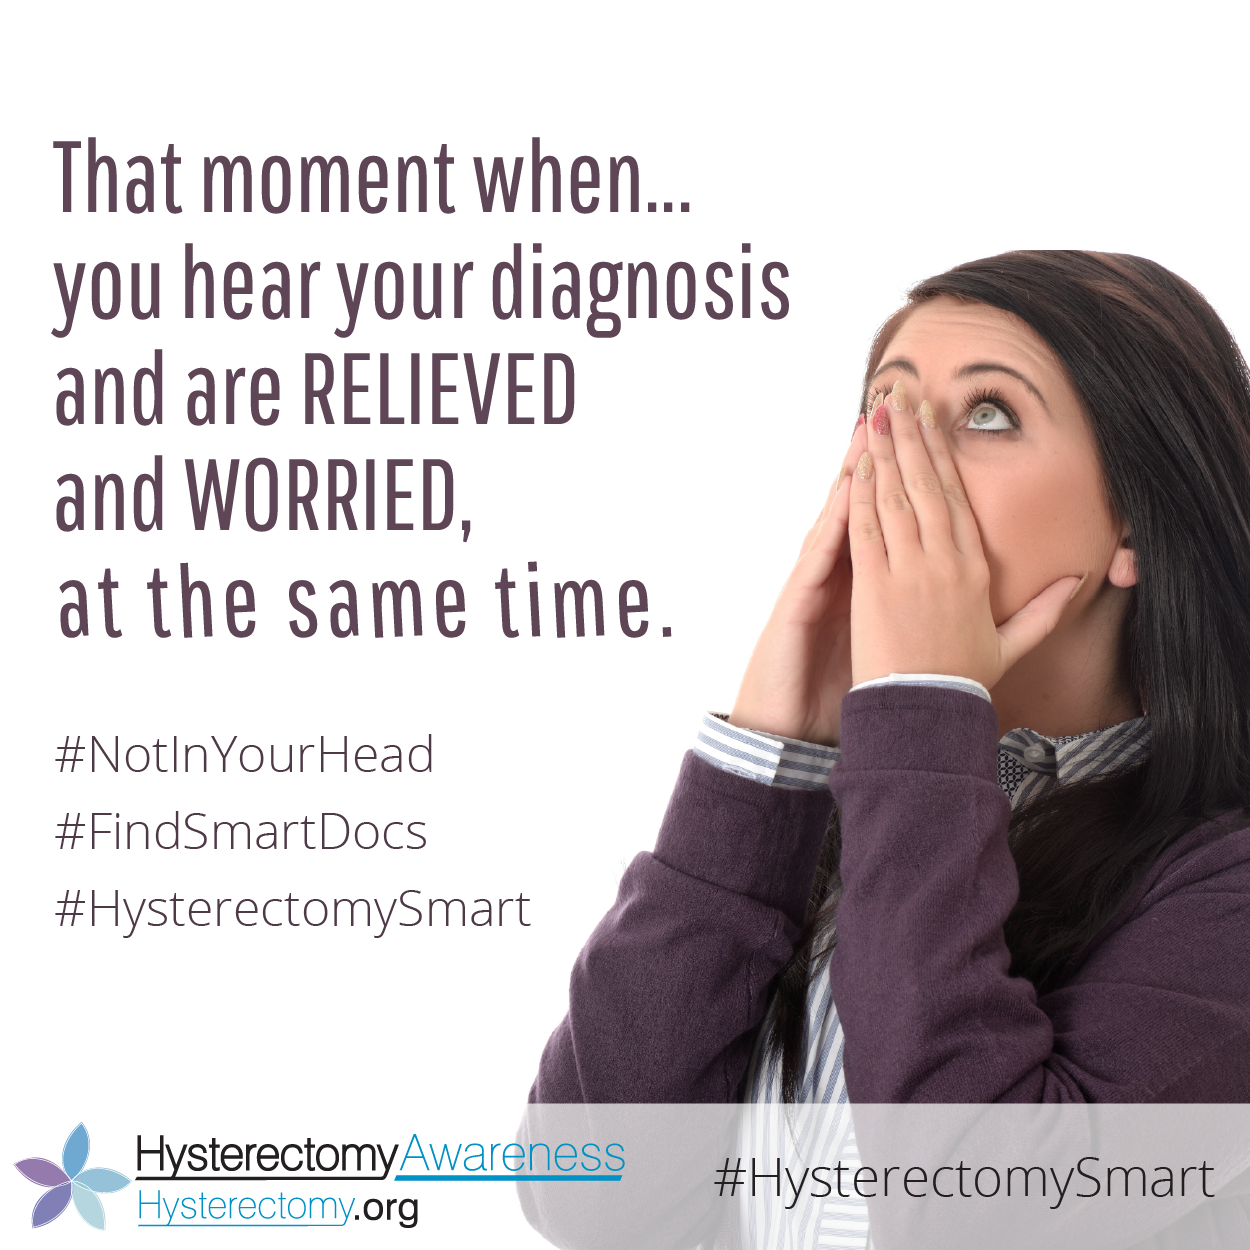 The moment you hear your diagnosis and are relieved and worried – at the same time. #NotInYourHead #FindSmartDocs #HysterectomySmart